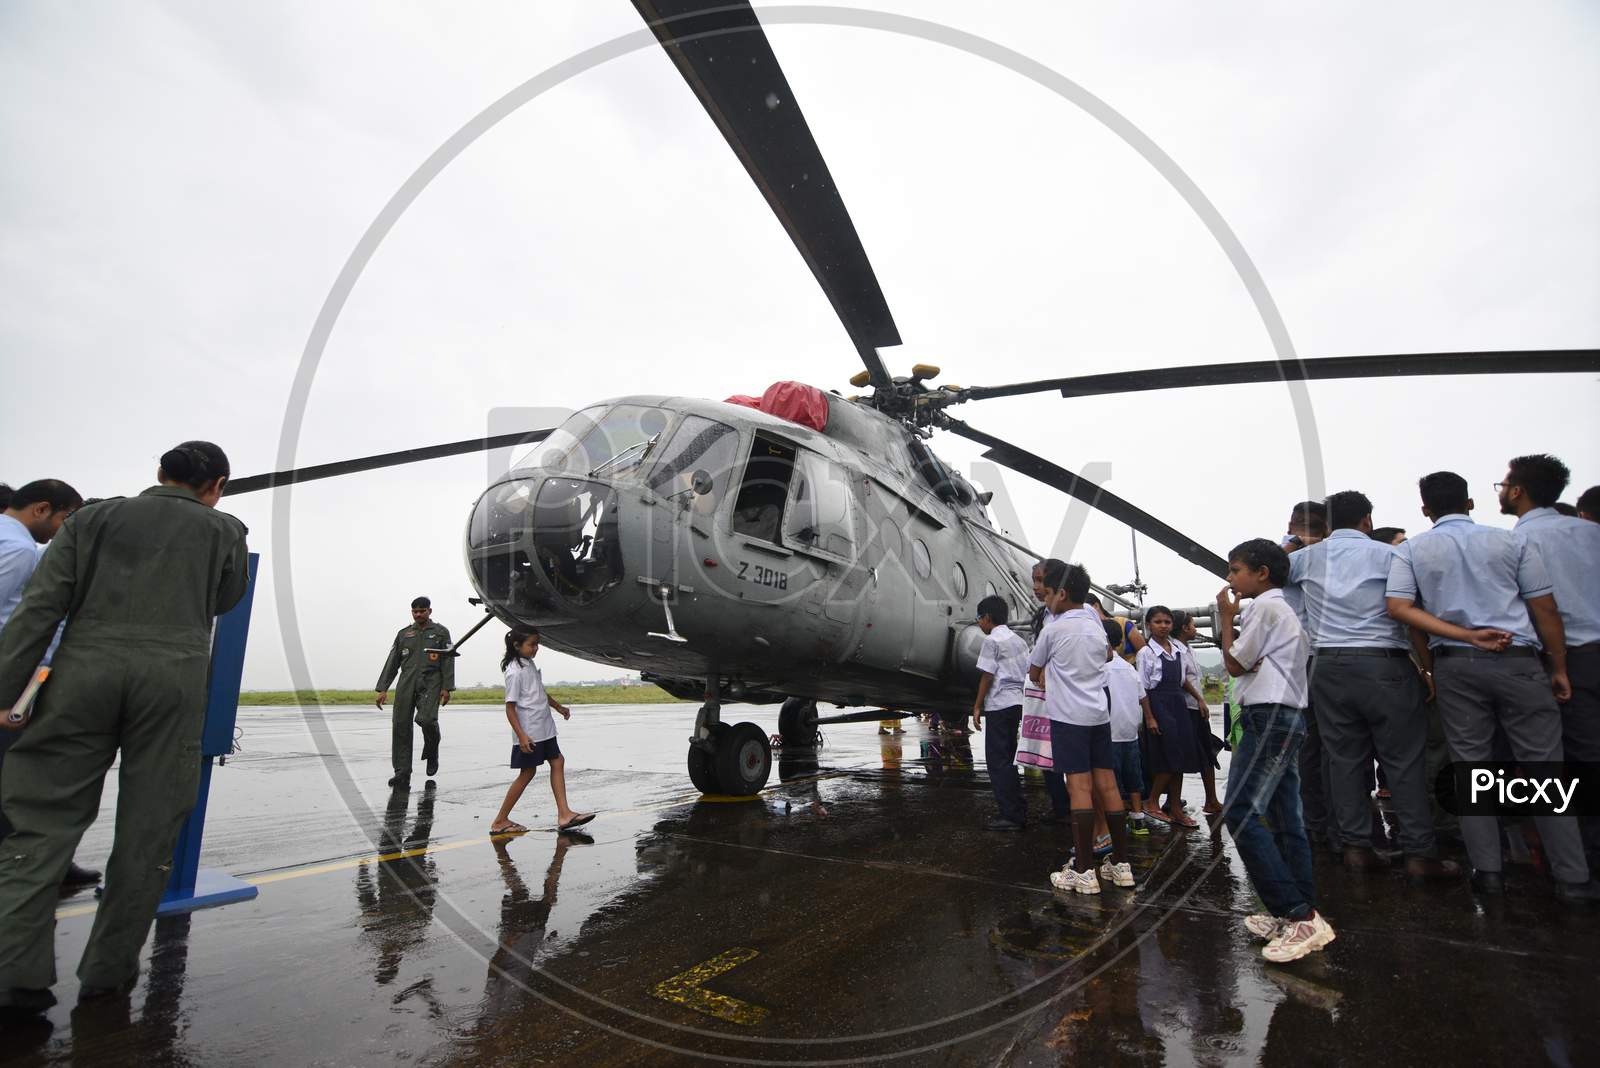 School Children At   Indian Air Force Helicopters During Expo In Guwahati, Assam